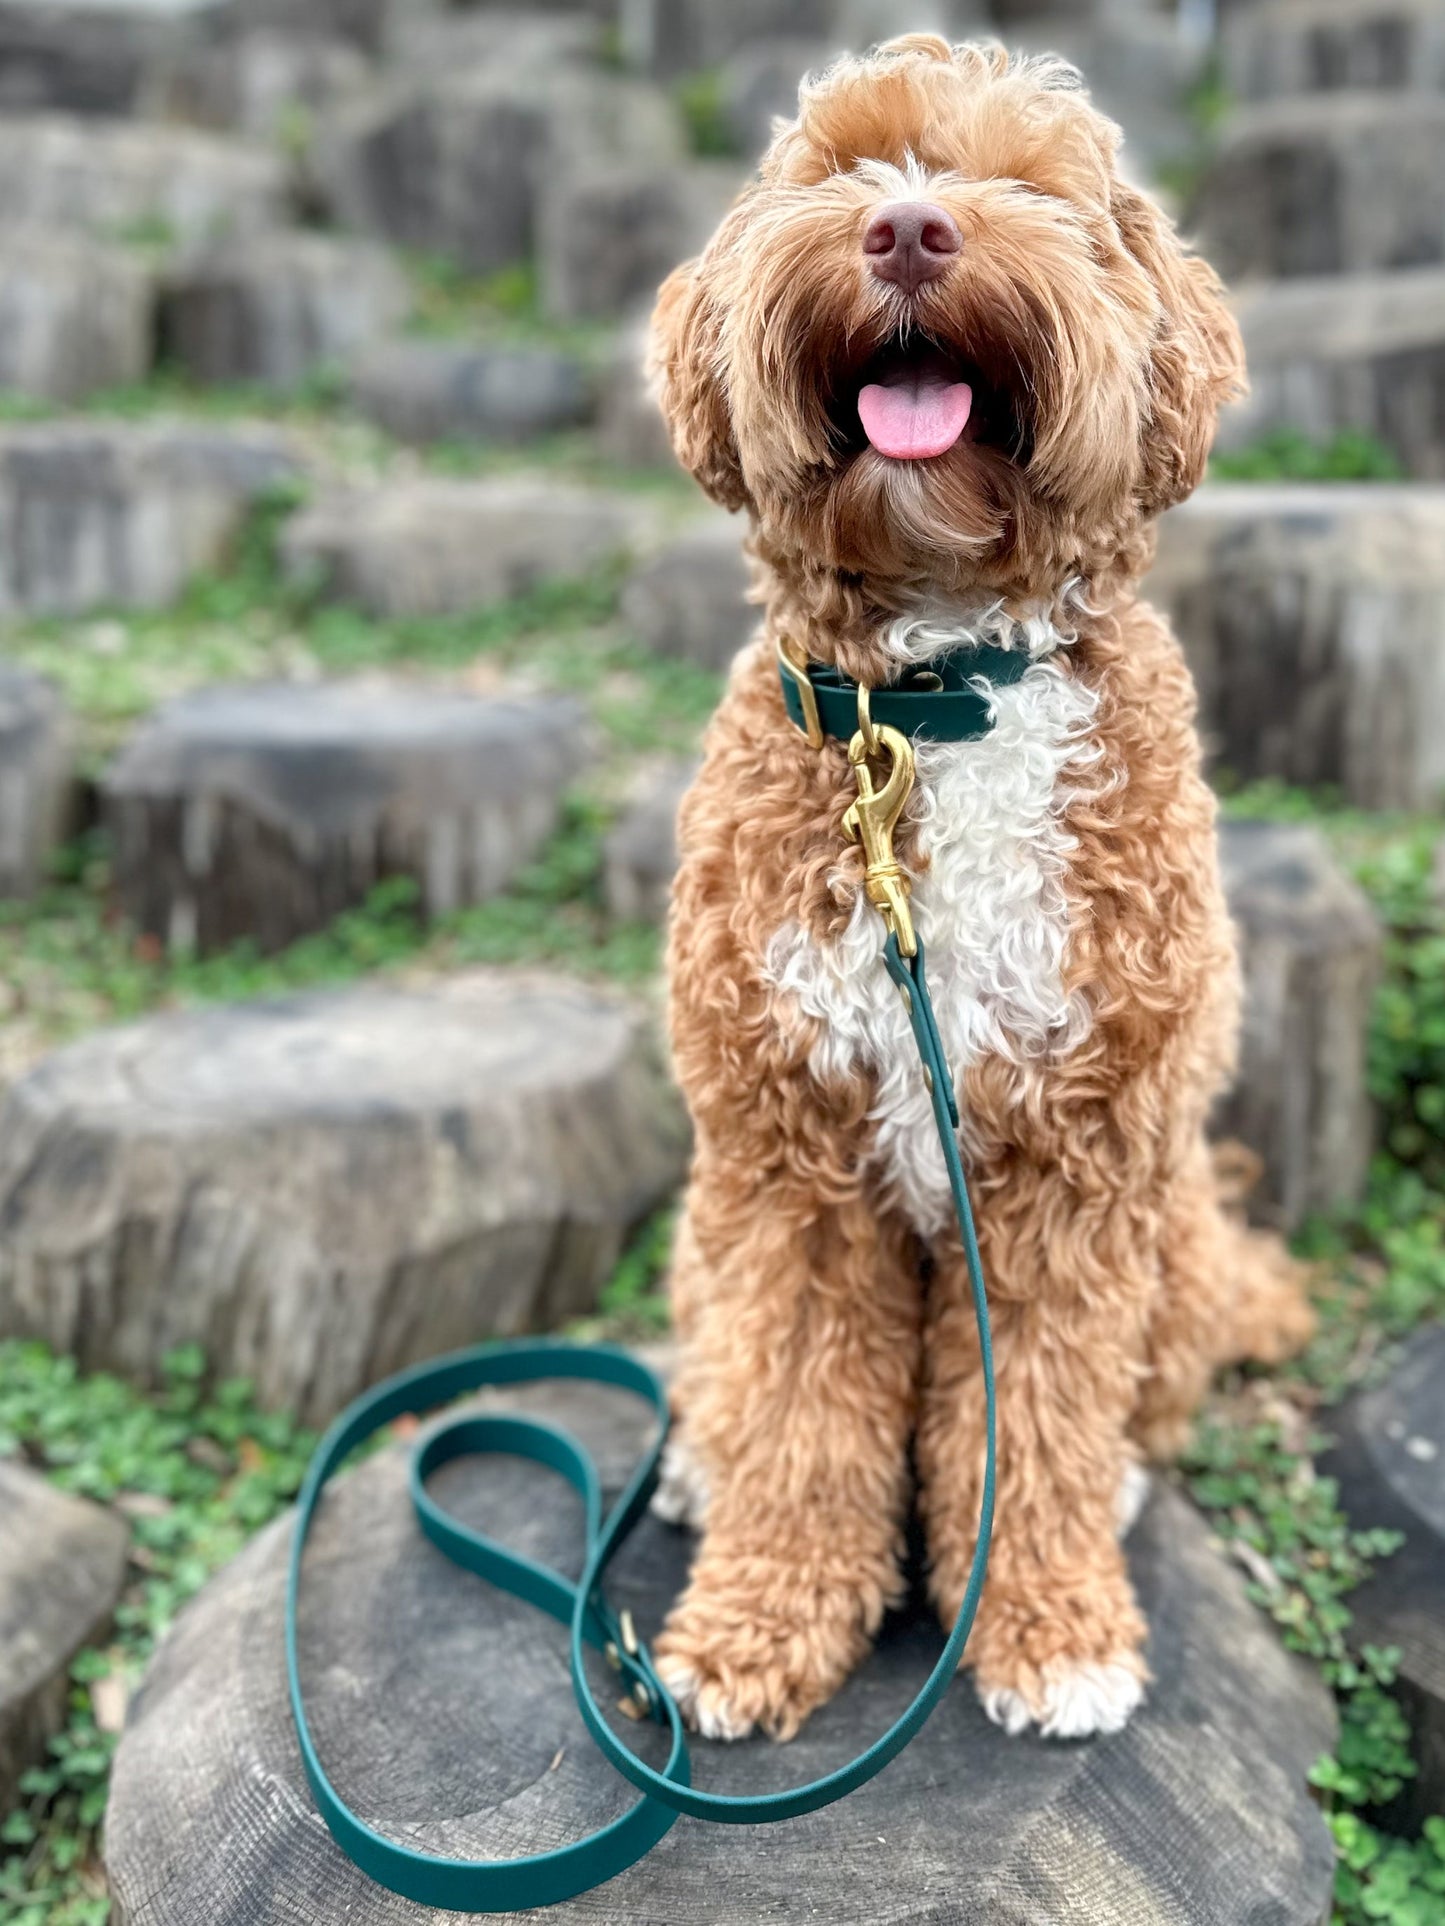 Wanderlust Pup Co. biothane dog leash is waterproof, odour-resistant, and ready for a walk in the city, hike in the woods, or a day at the beach. Made of Biothane with solid brass hardware. Handmade  British Columbia, Canada